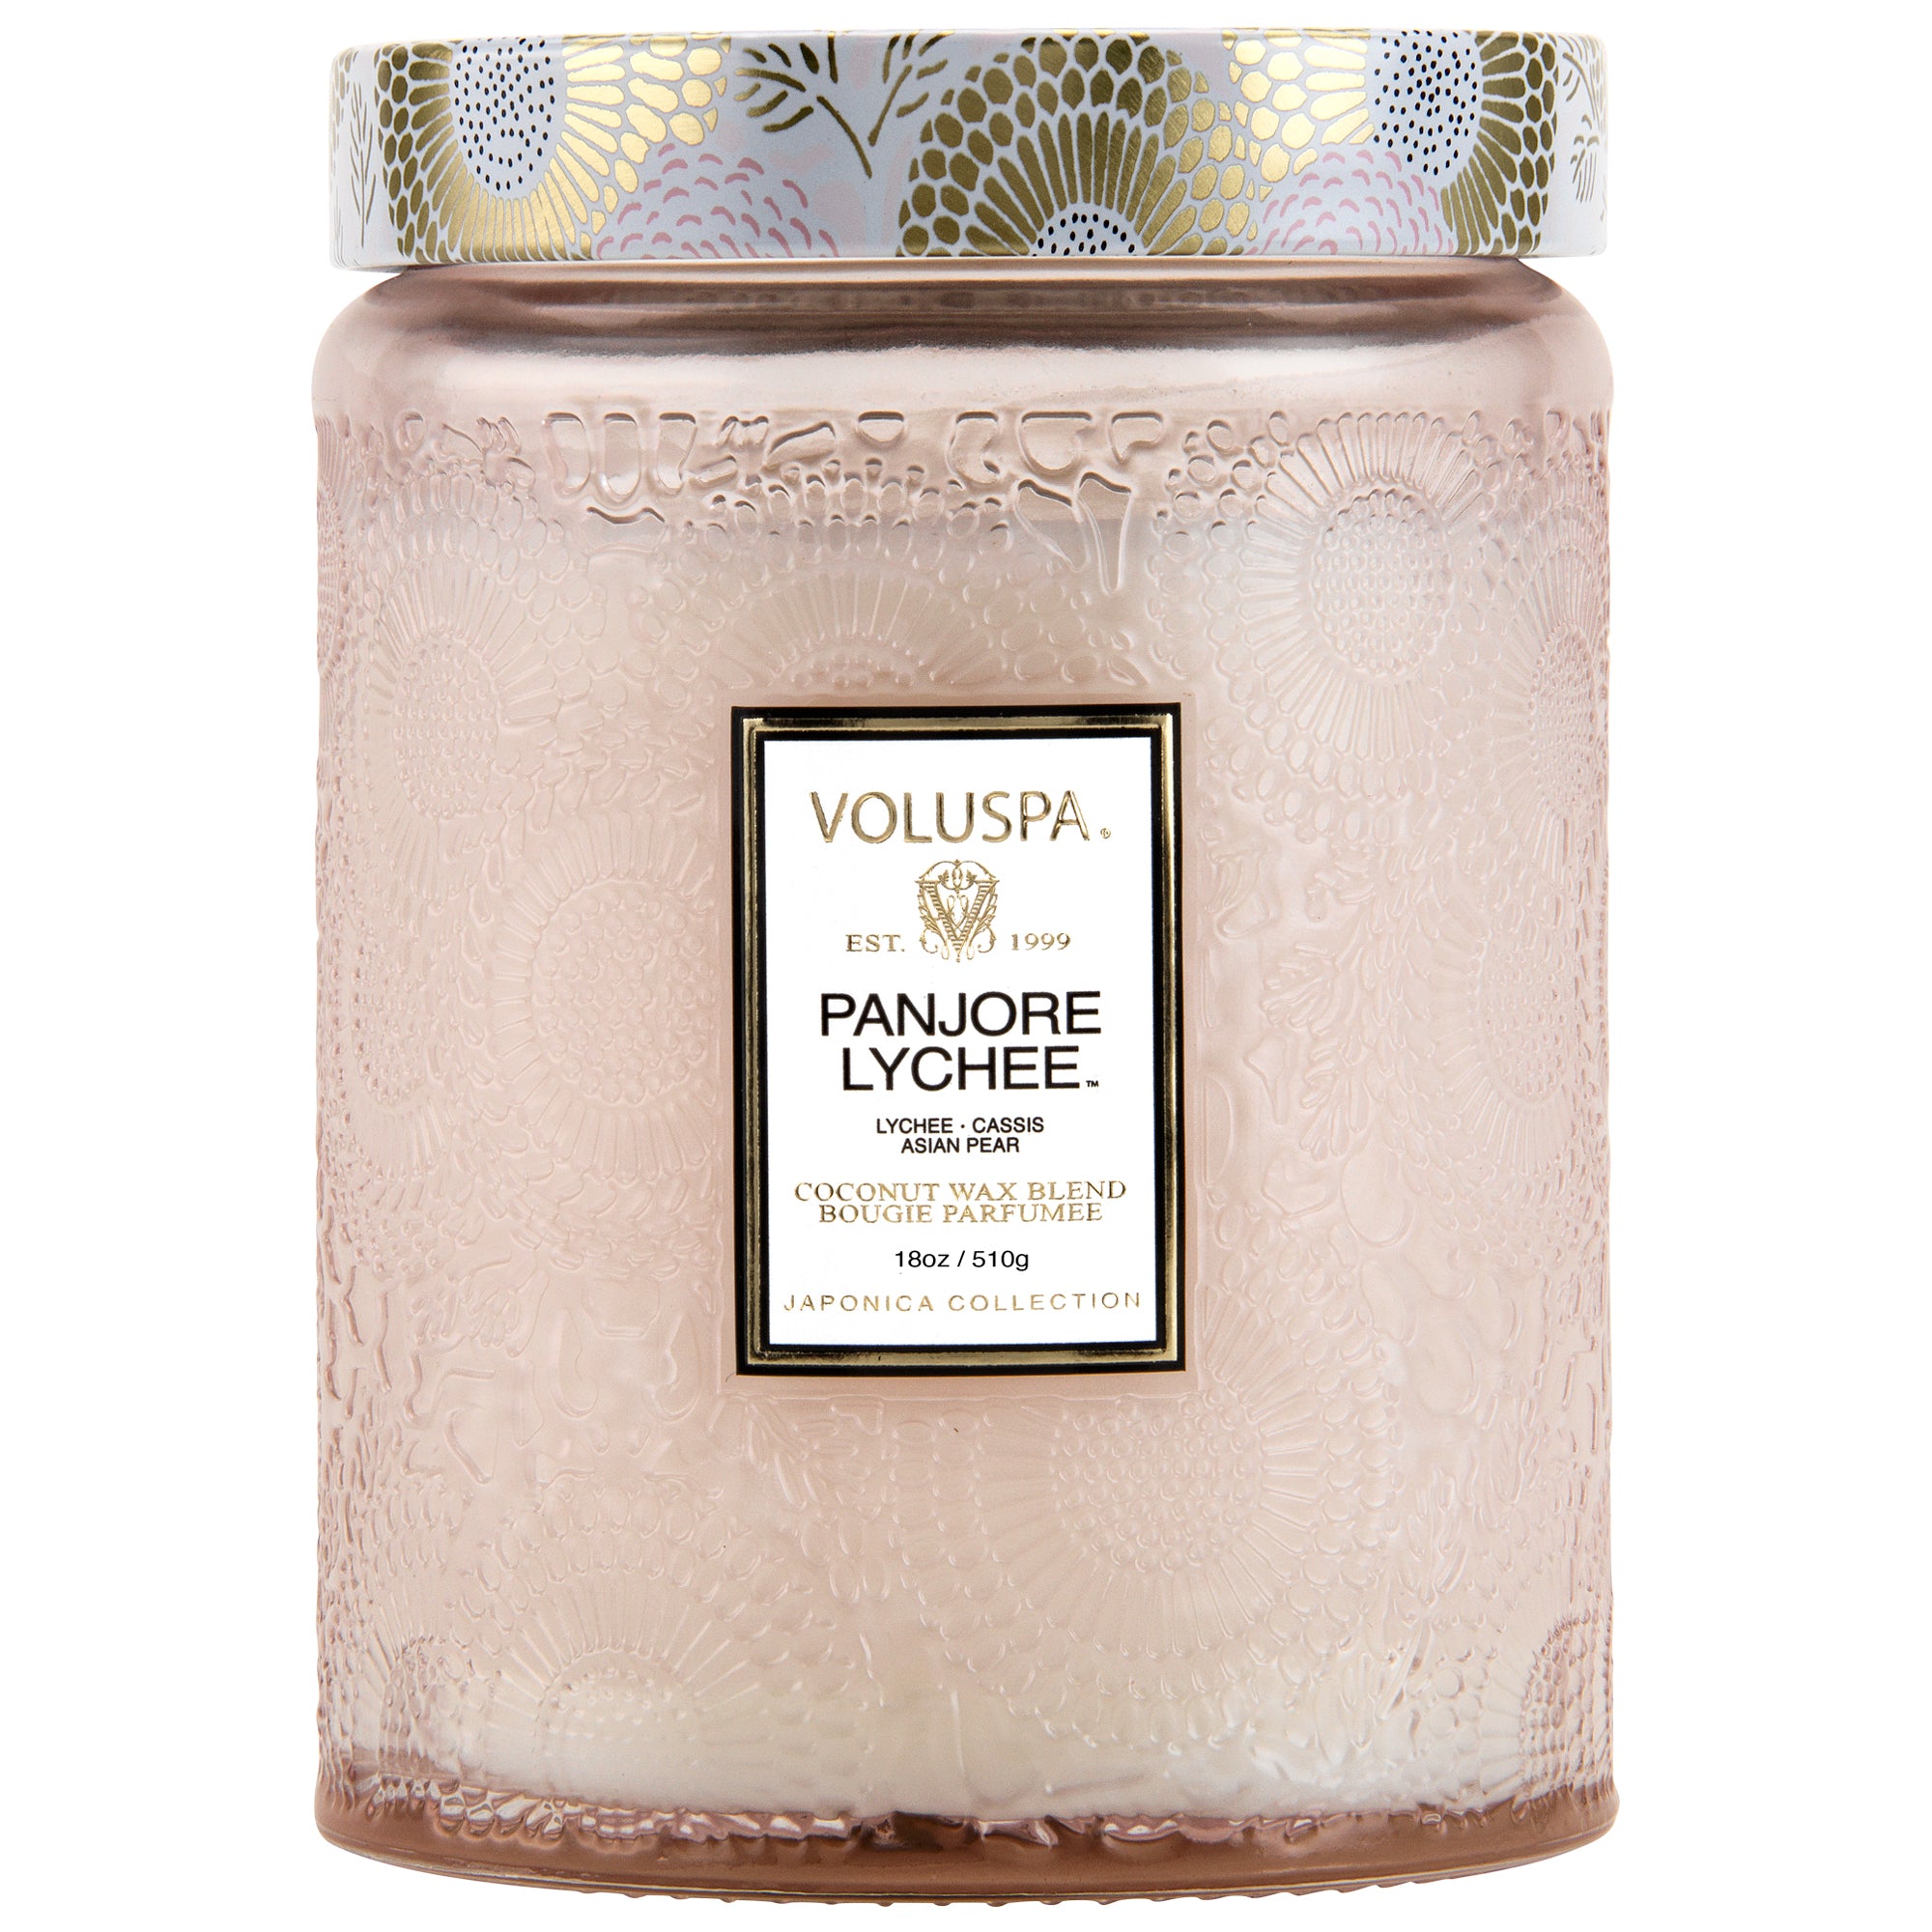 Panjore Lychee - Large Jar Candle